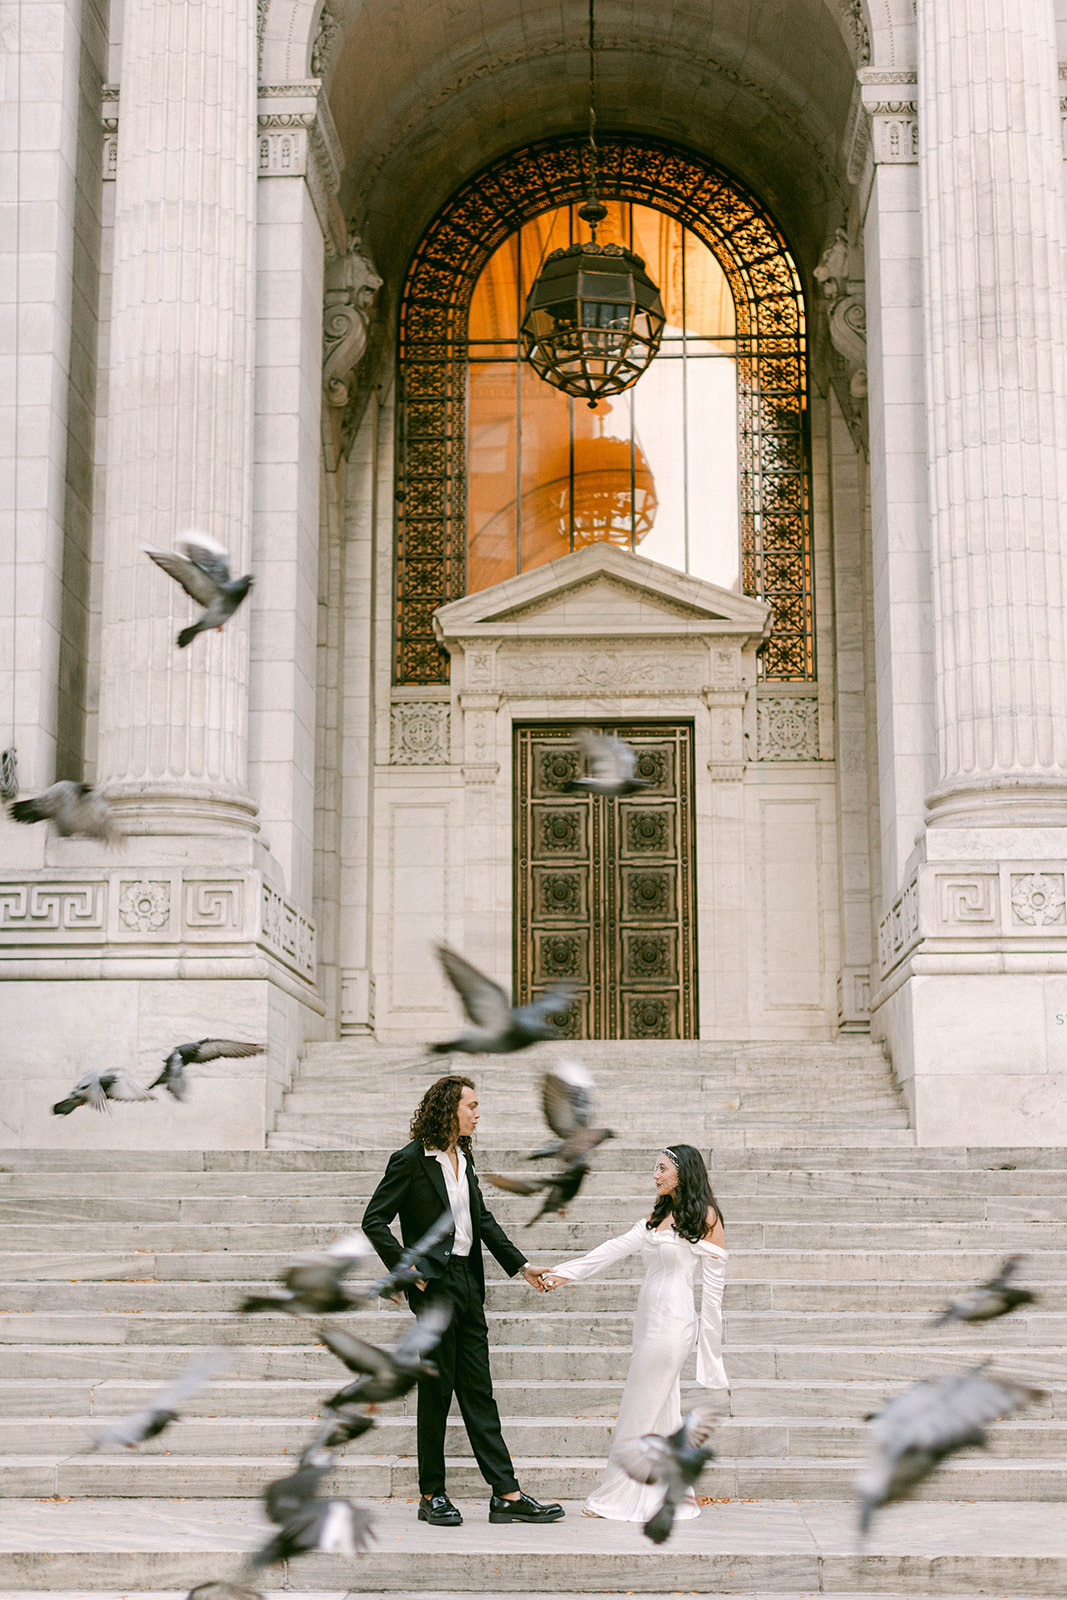  NYC ENGAGEMENT SHOOT WEDDINGS BY NATO